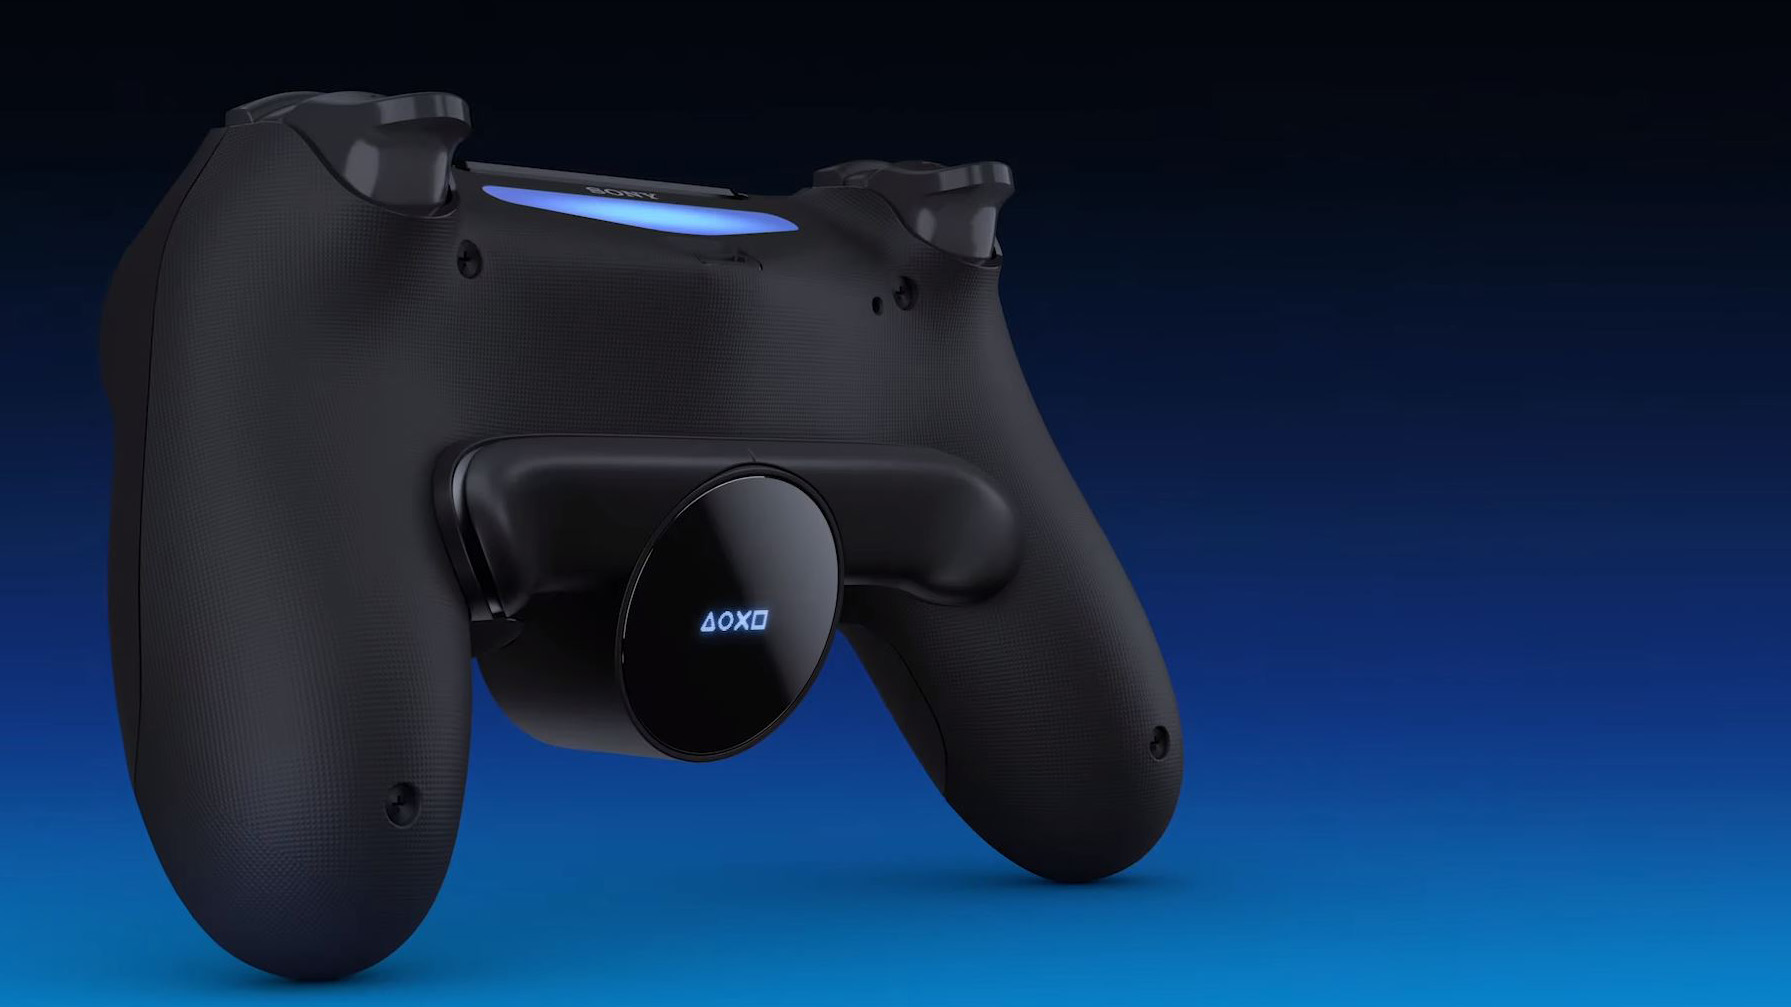 ps4 controller programmable buttons